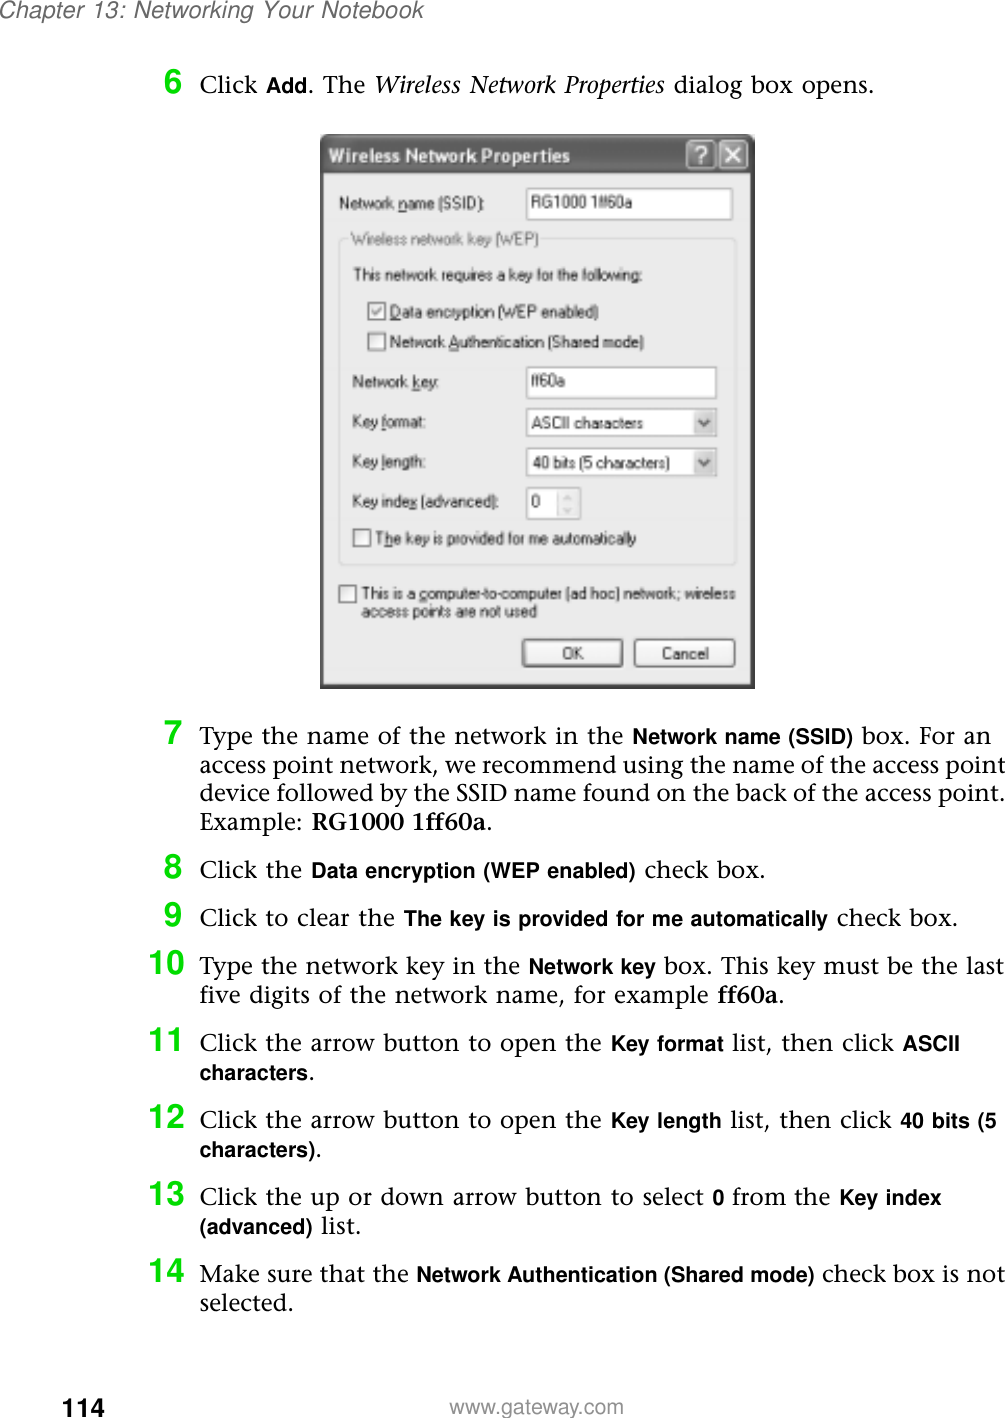 114Chapter 13: Networking Your Notebookwww.gateway.com6Click Add. The Wireless Network Properties dialog box opens.7Type the name of the network in the Network name (SSID) box. For an access point network, we recommend using the name of the access point device followed by the SSID name found on the back of the access point. Example: RG1000 1ff60a.8Click the Data encryption (WEP enabled) check box.9Click to clear the The key is provided for me automatically check box.10 Type the network key in the Network key box. This key must be the last five digits of the network name, for example ff60a.11 Click the arrow button to open the Key format list, then click ASCII characters.12 Click the arrow button to open the Key length list, then click 40 bits (5 characters).13 Click the up or down arrow button to select 0 from the Key index (advanced) list.14 Make sure that the Network Authentication (Shared mode) check box is not selected.